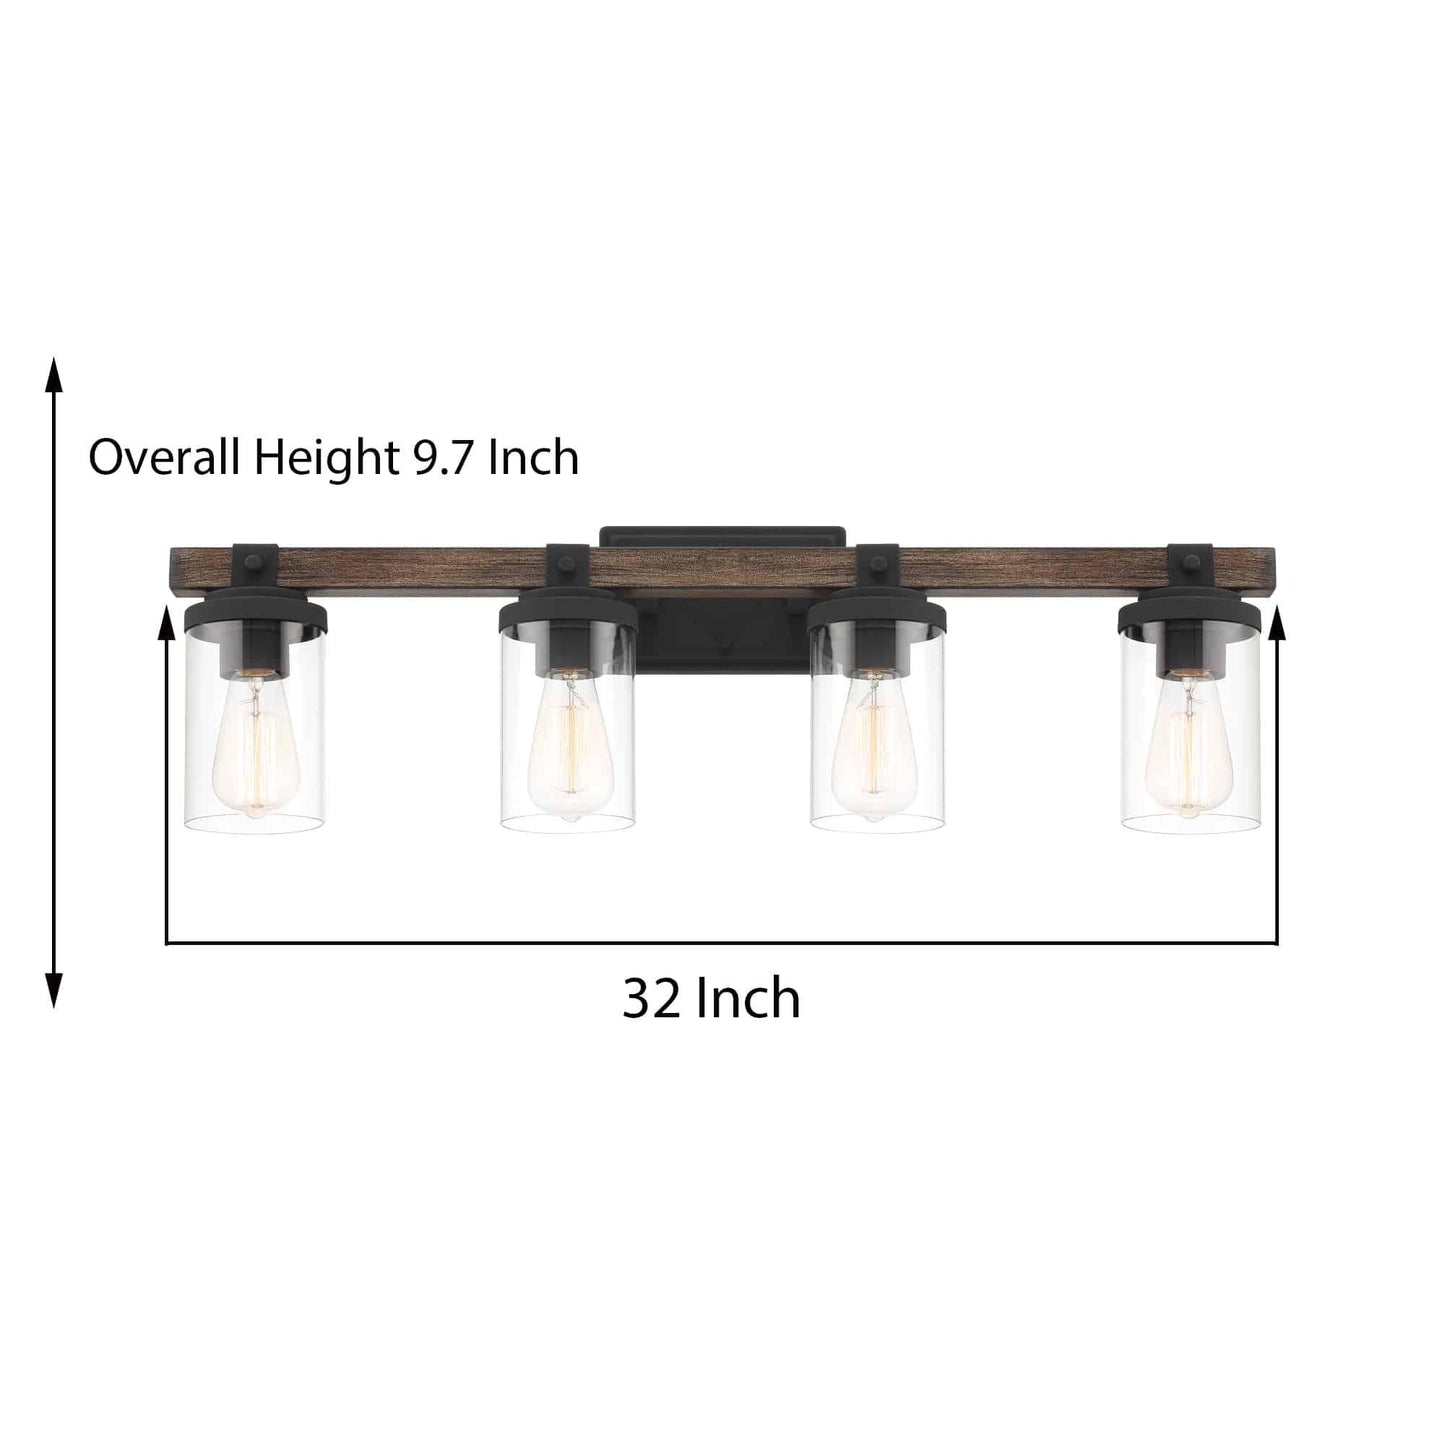 5204 | 4 - Light Dimmable Vanity Light by ACROMA™  UL - ACROMA